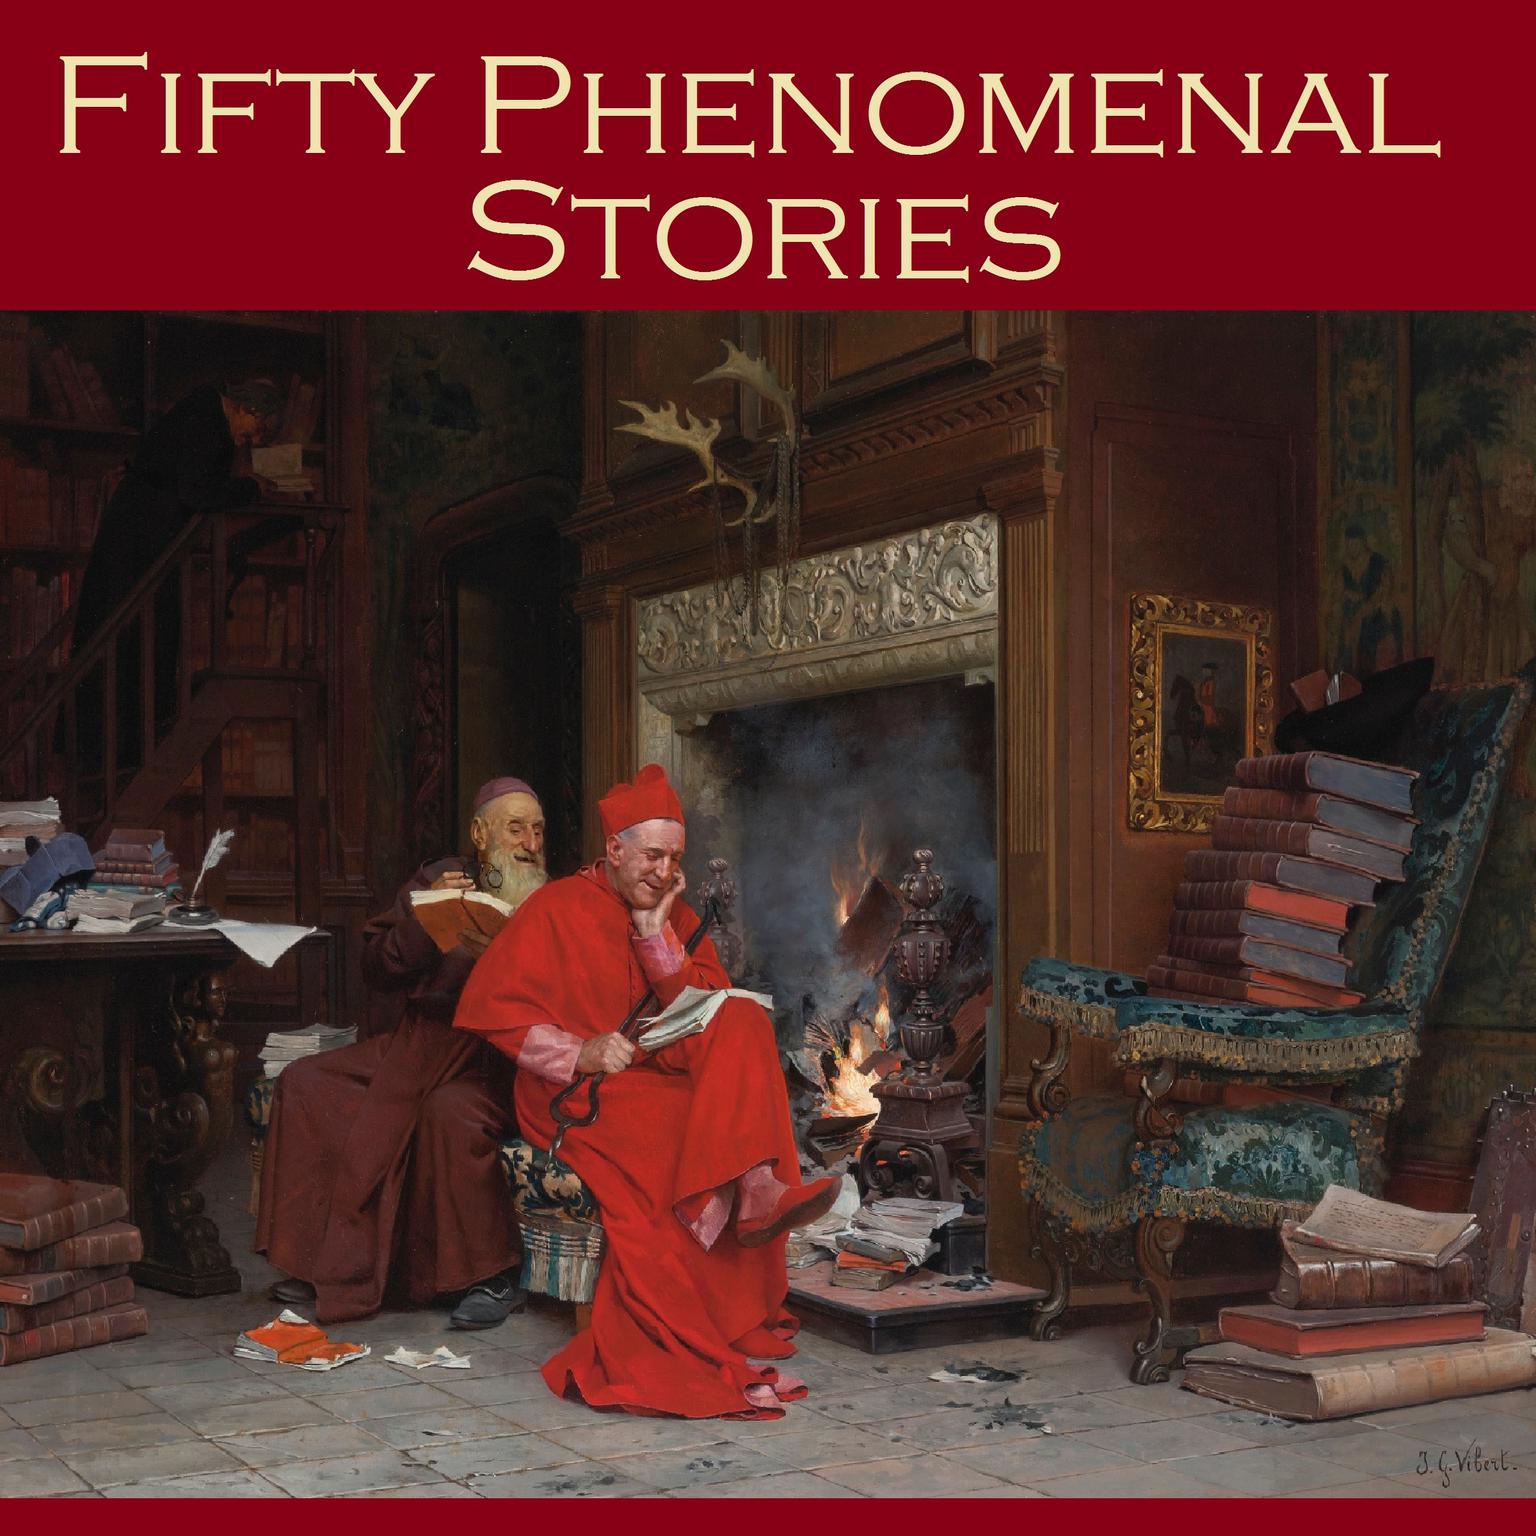 Fifty Phenomenal Stories Audiobook, by Various 